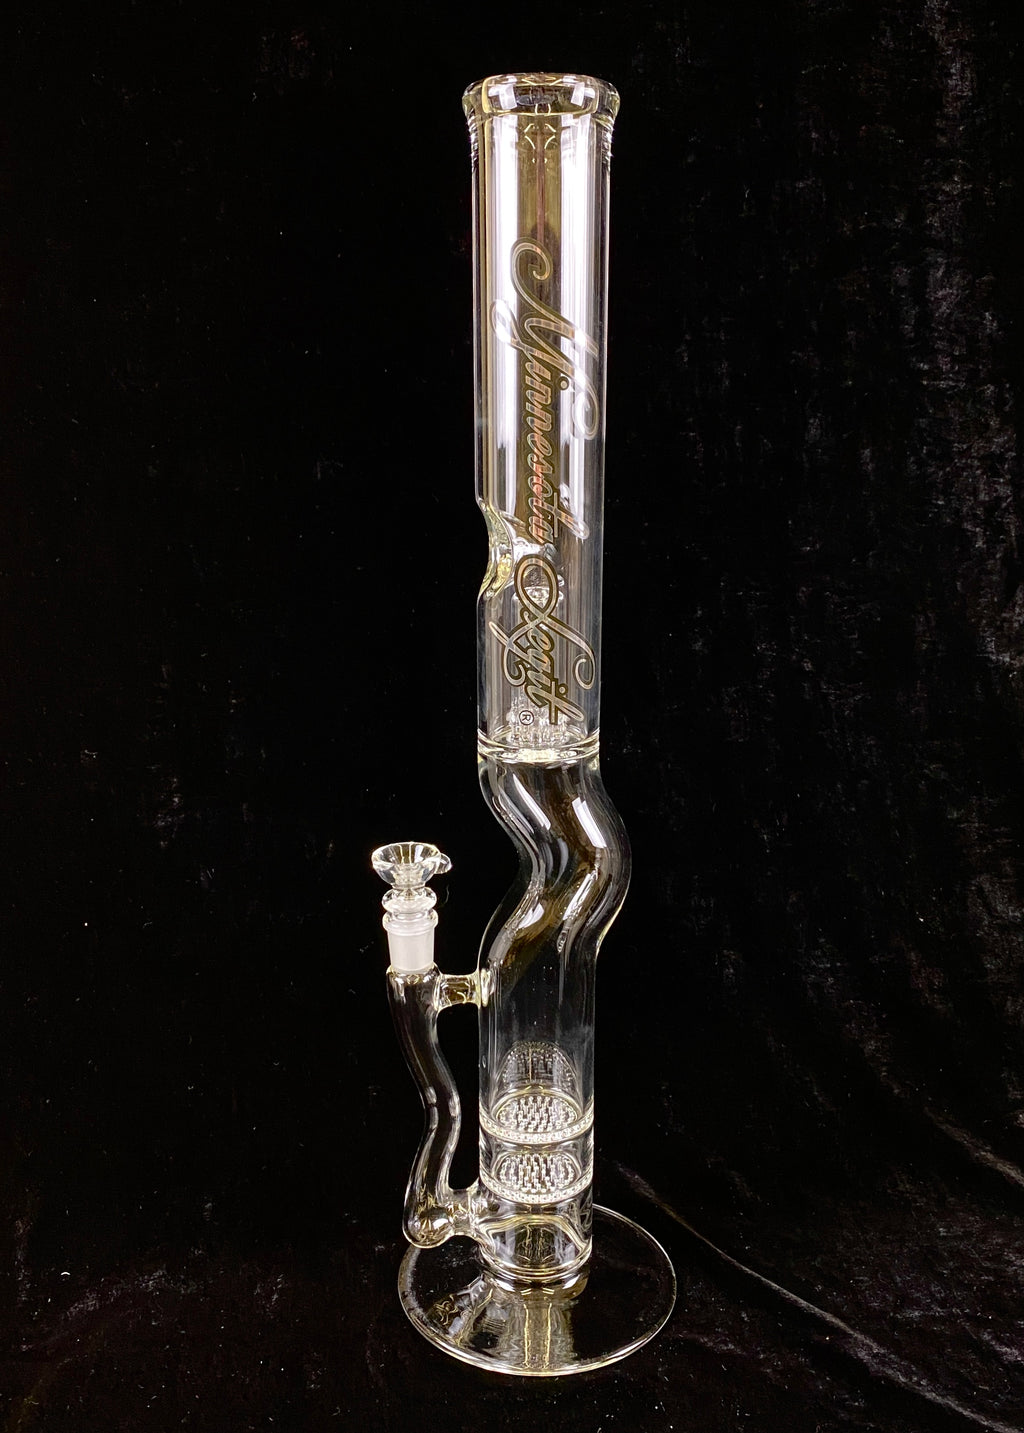 Double Honeycomb w. Micro Dome Cage Waterpipe